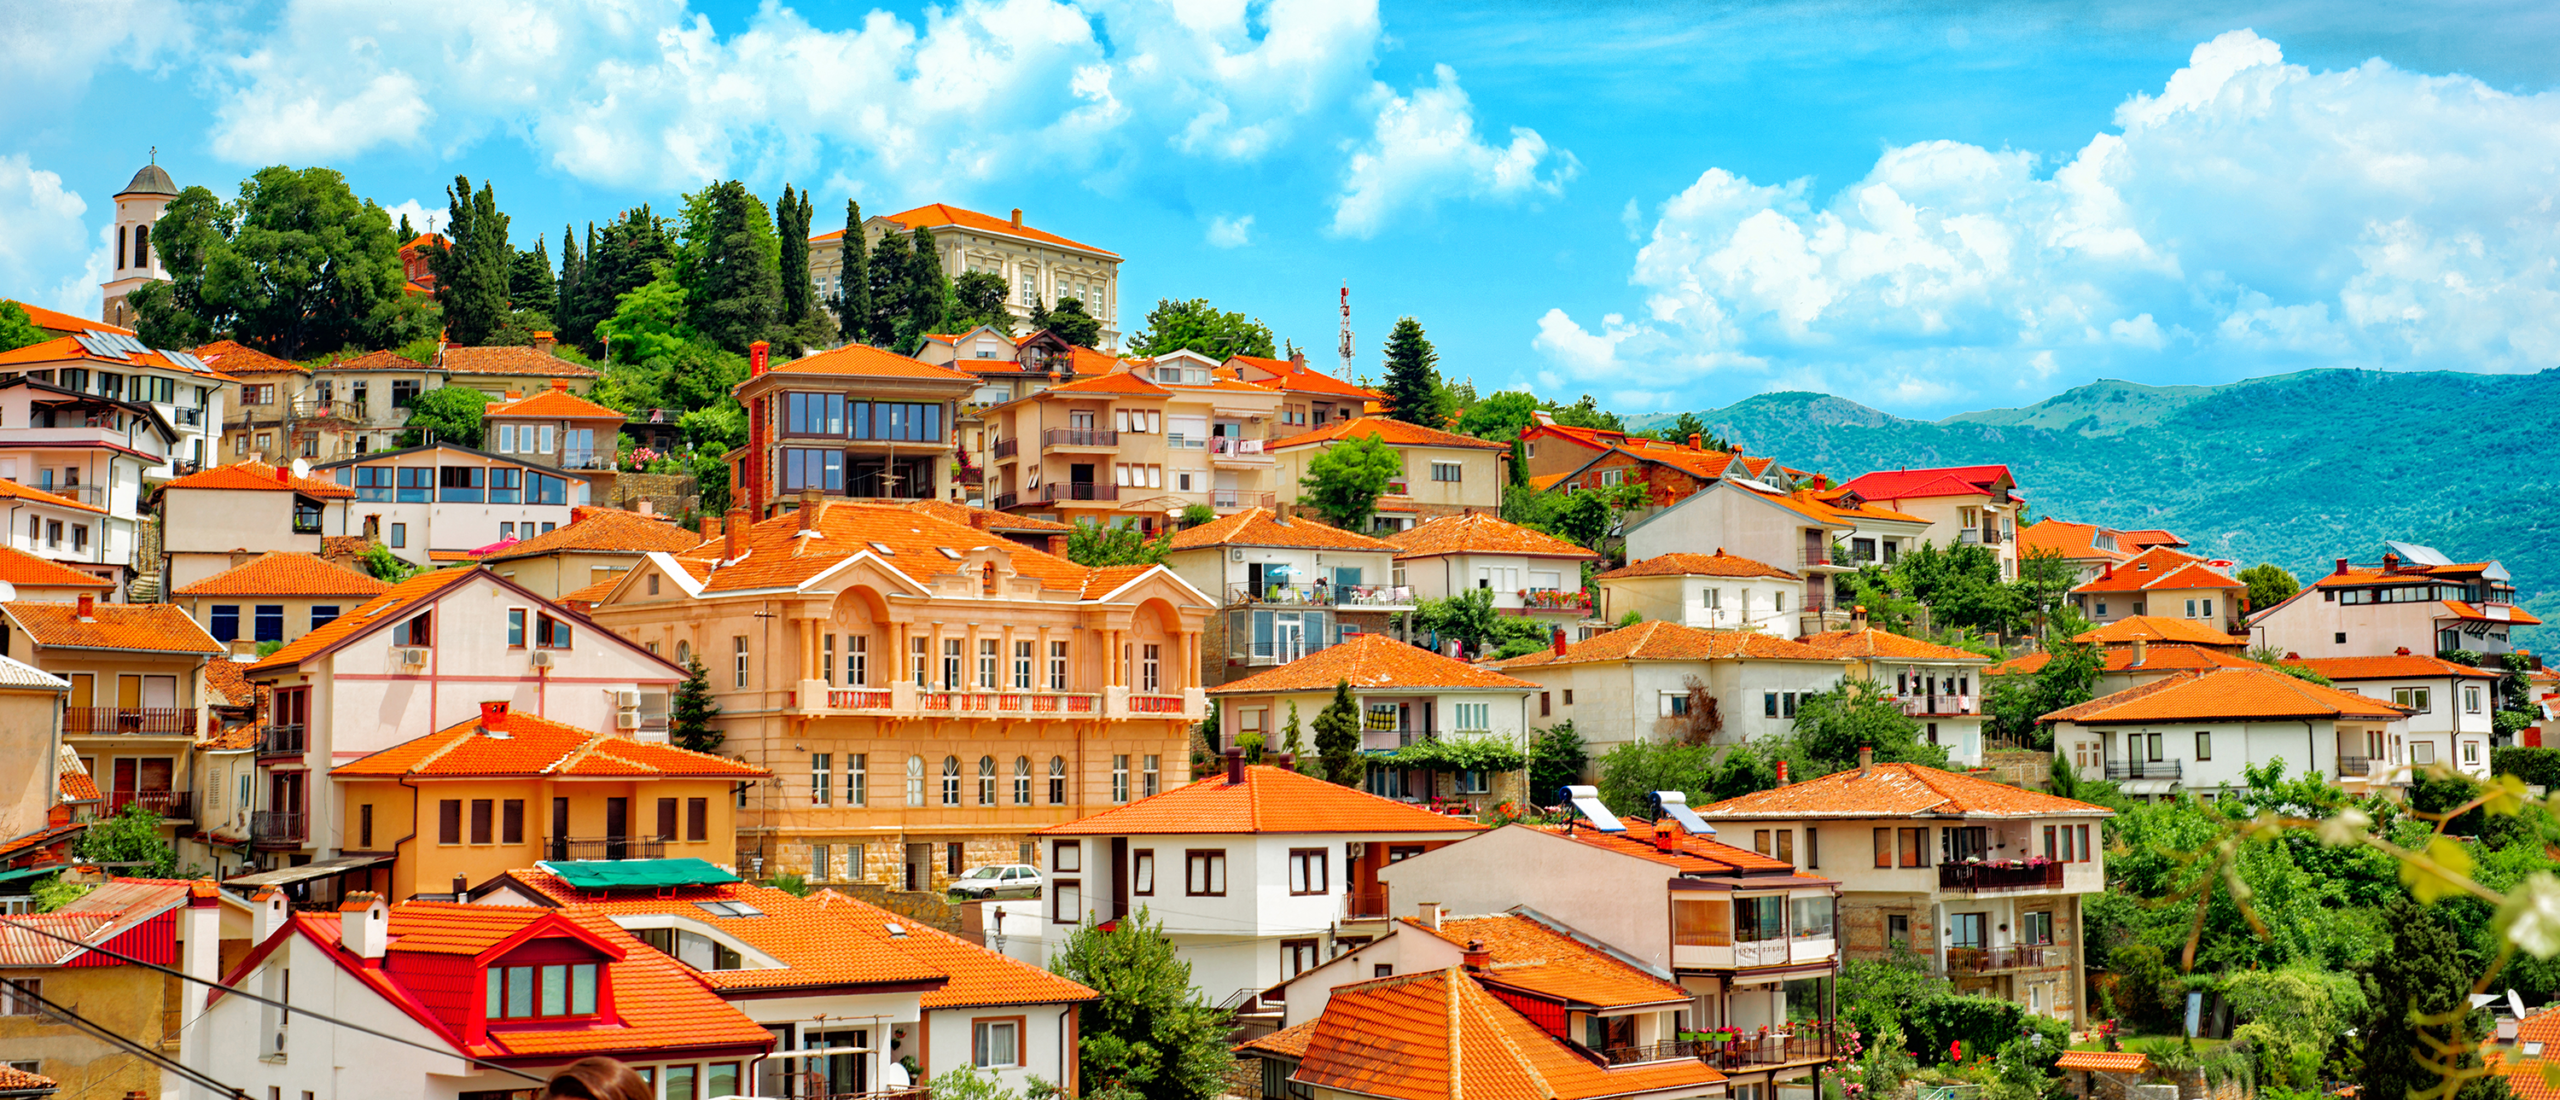 Red roofed houses on hill